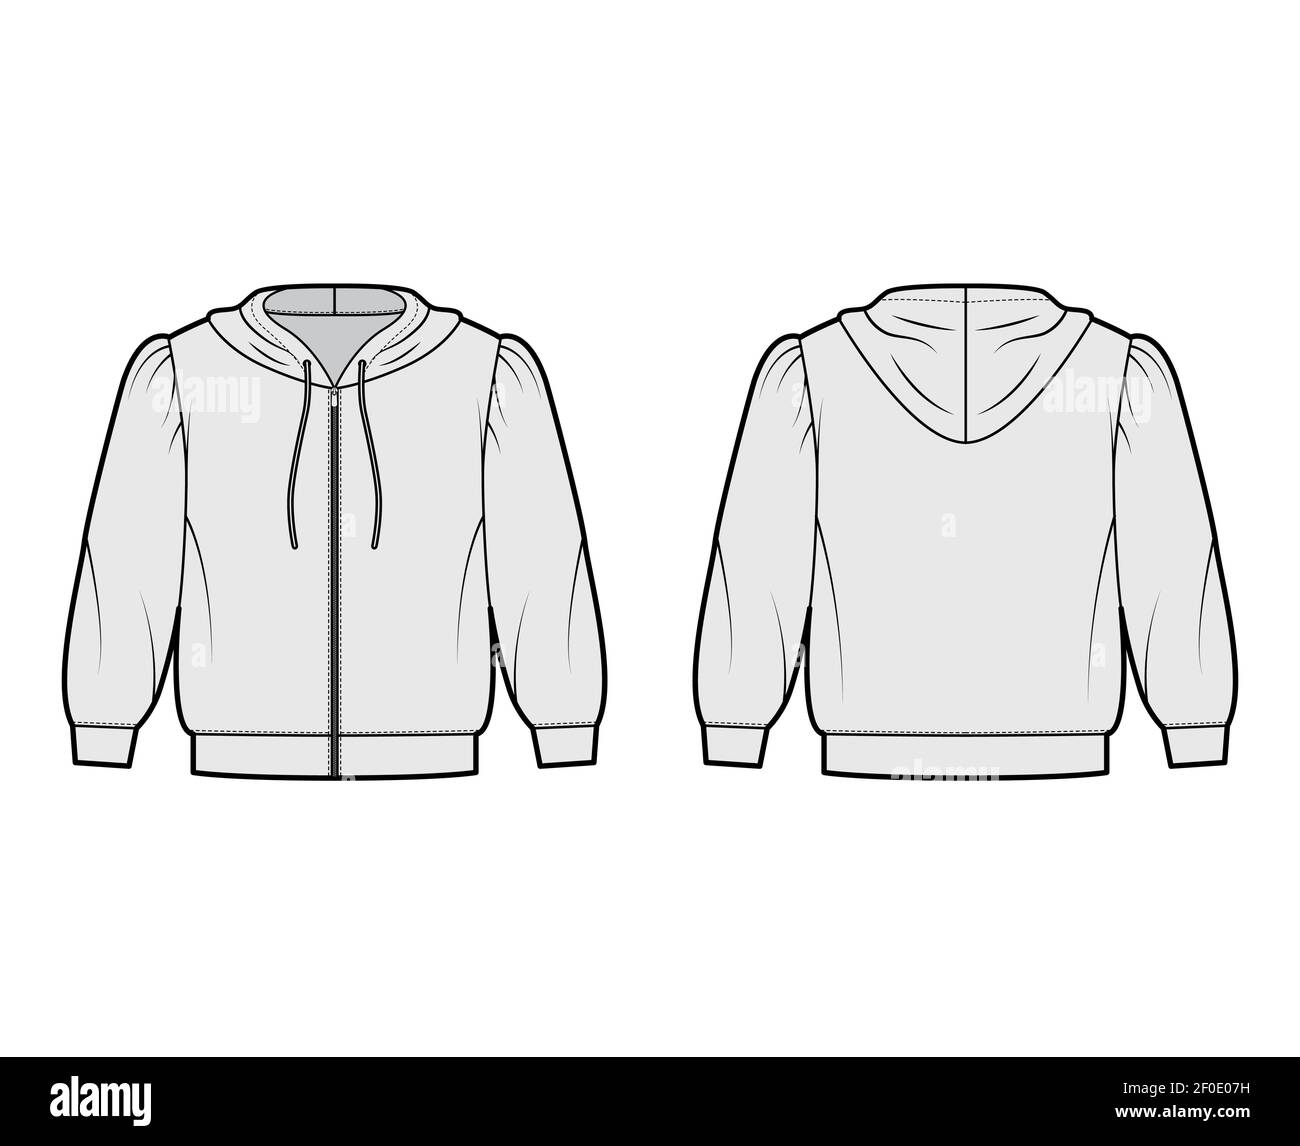 Zip-up Hoody sweatshirt technical fashion illustration with elbow sleeves, relax body, banded hem, drawstring. Flat small apparel template front, back, grey color style. Women, men, unisex CAD mockup Stock Vector